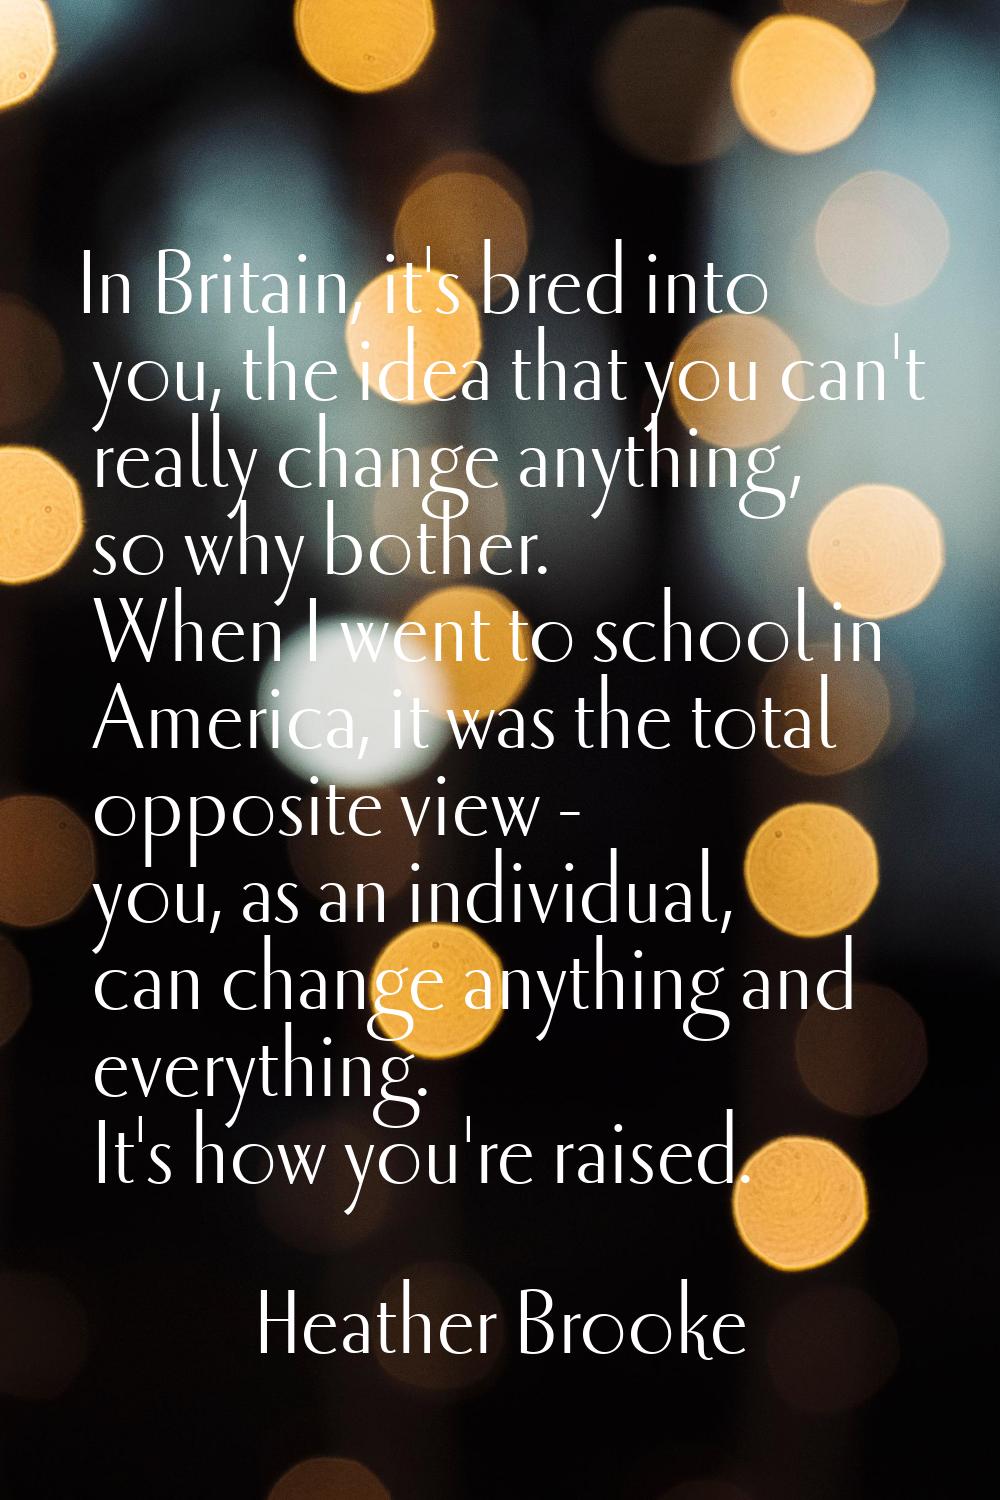 In Britain, it's bred into you, the idea that you can't really change anything, so why bother. When